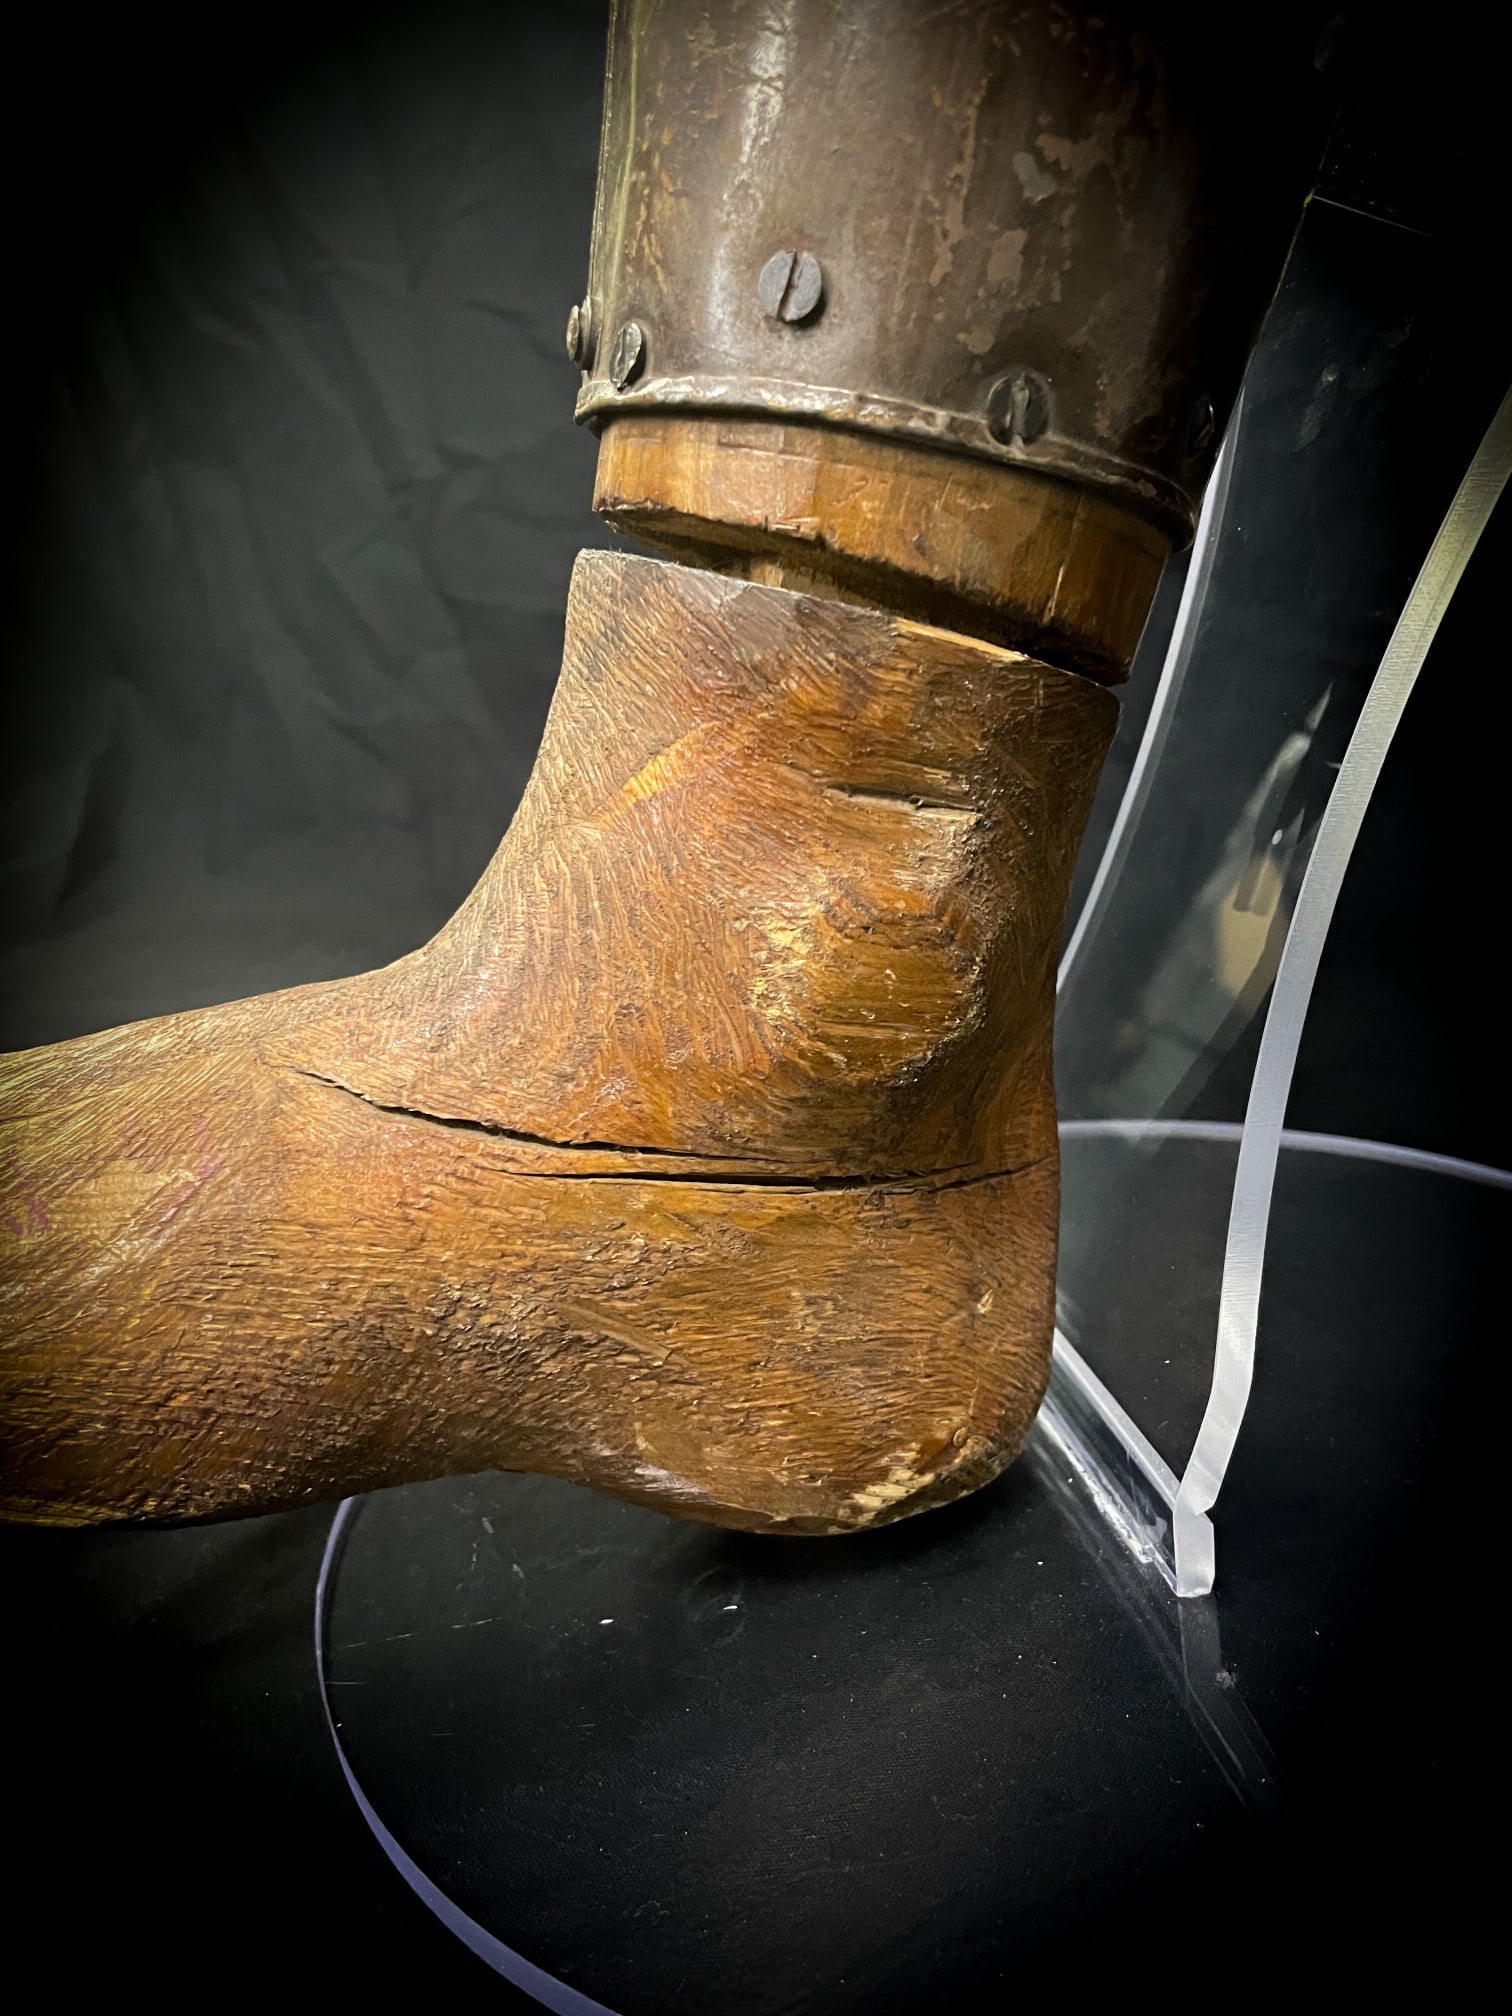 An American POW made his own prosthetic leg at a German prison camp during WWII